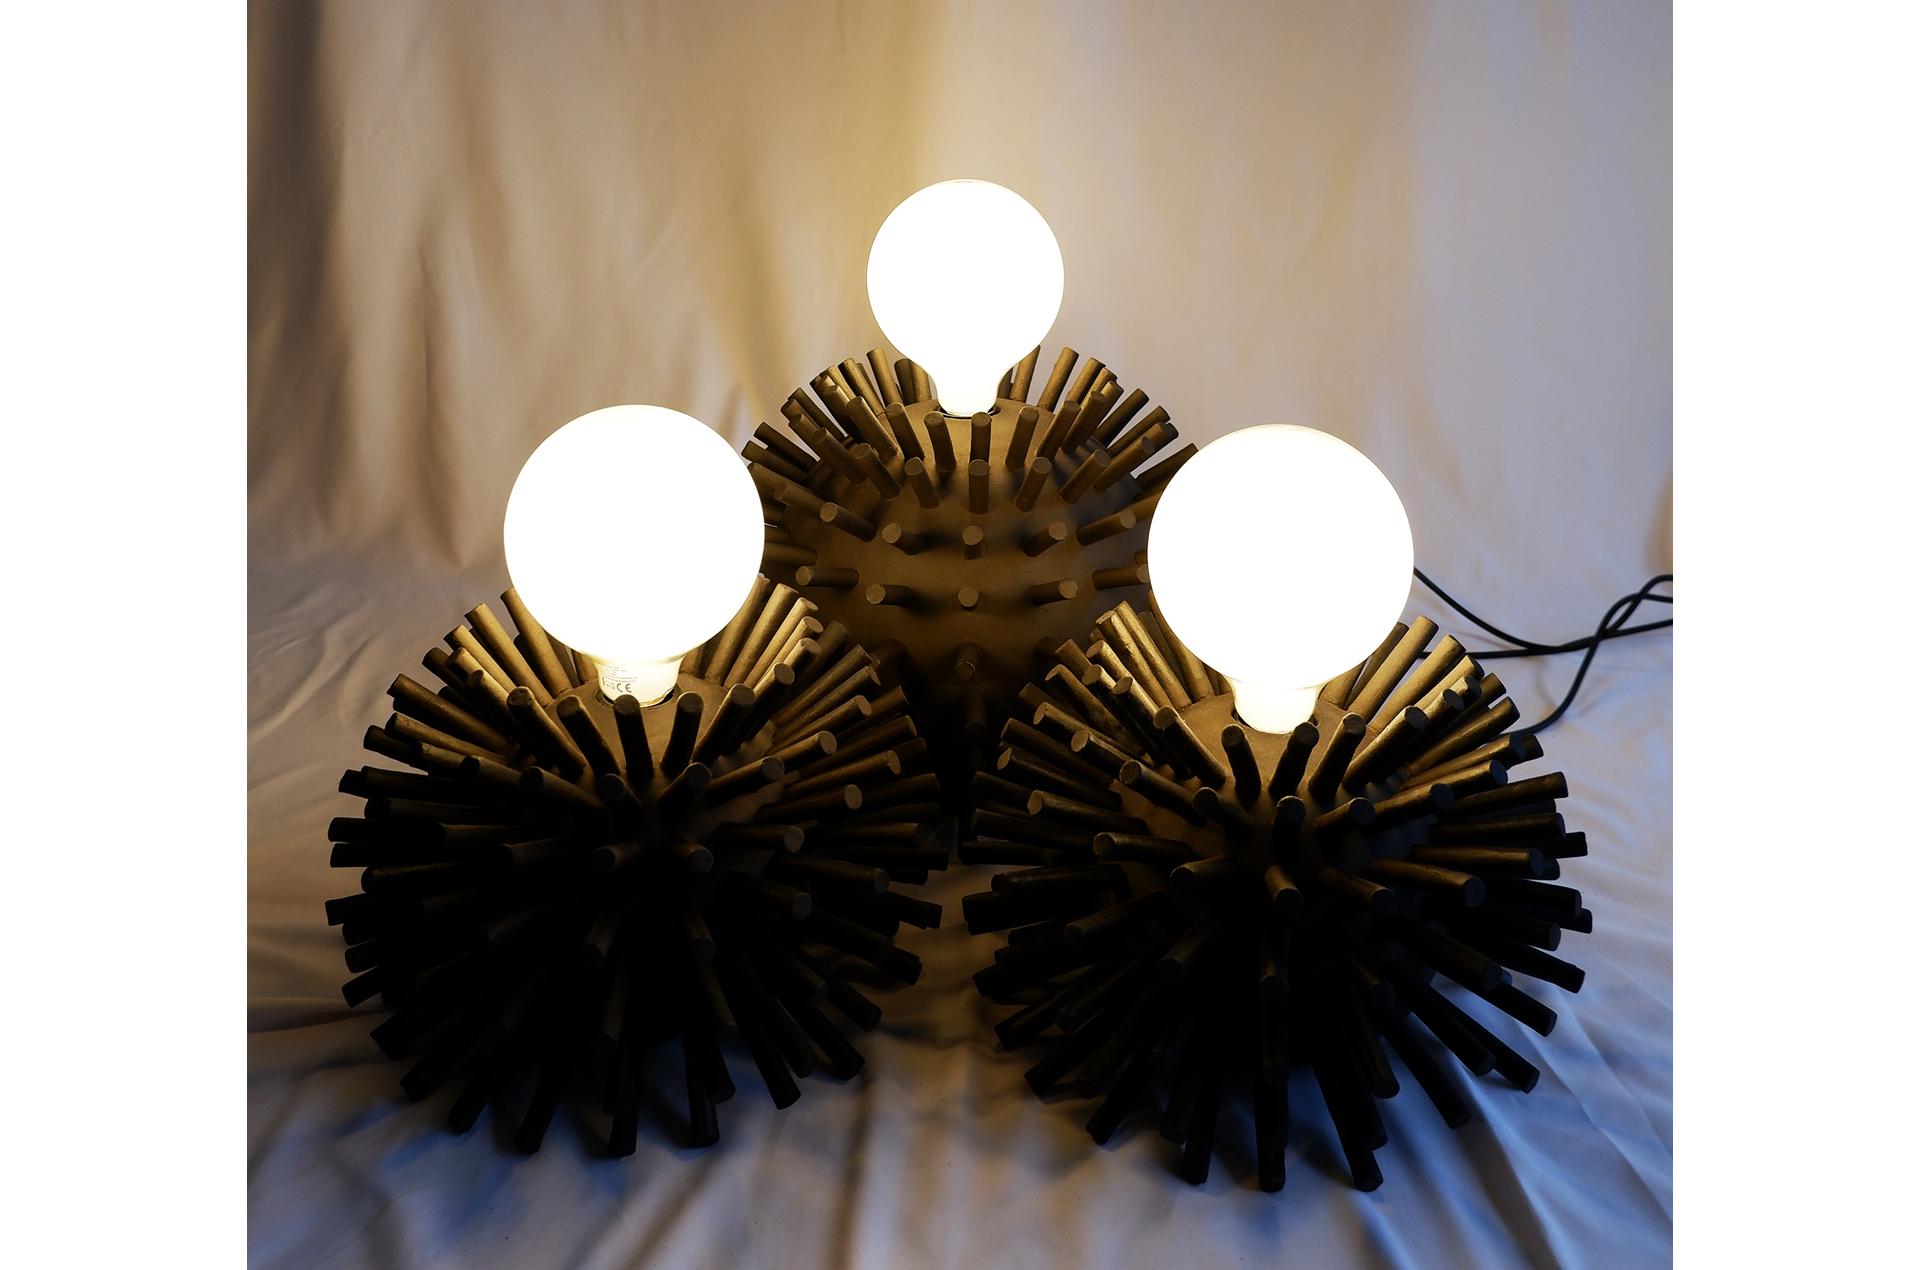 Symbiosis Ceramic Sculptural Set of Furniture and Lighting by IAAI Studio In New Condition For Sale In Brussels, BE